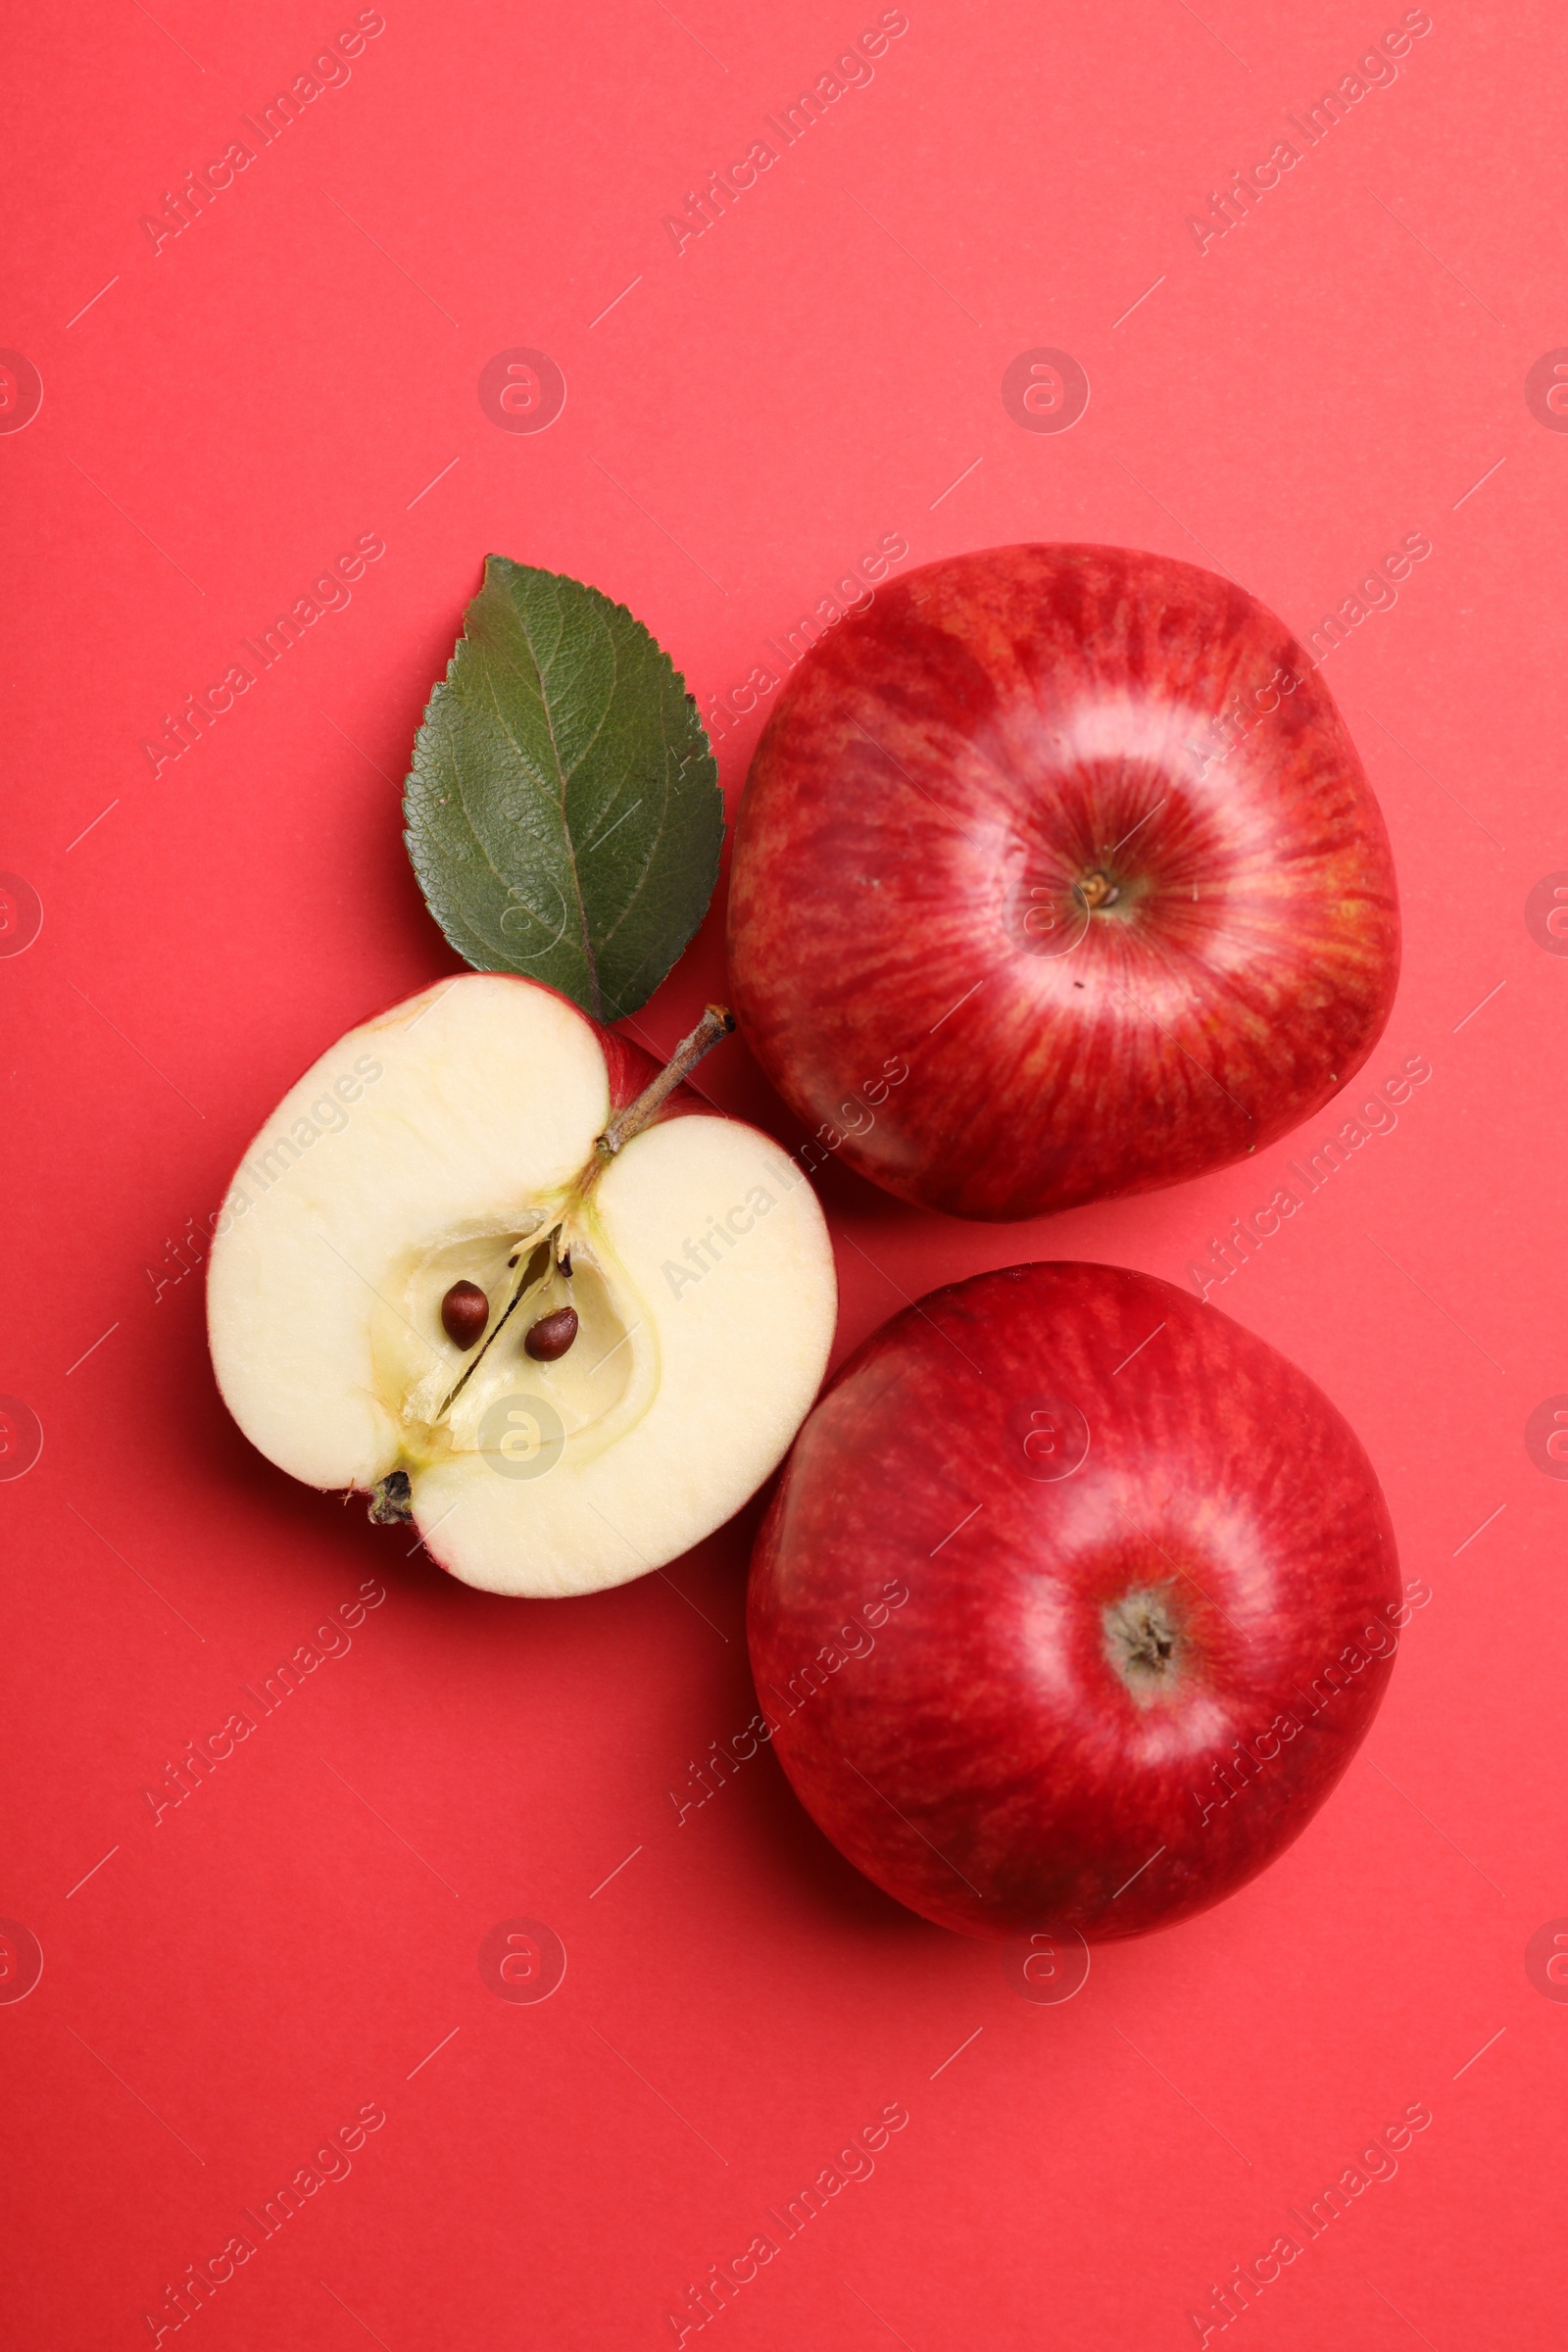 Photo of Whole, cut red apples and green leaf on color background, flat lay